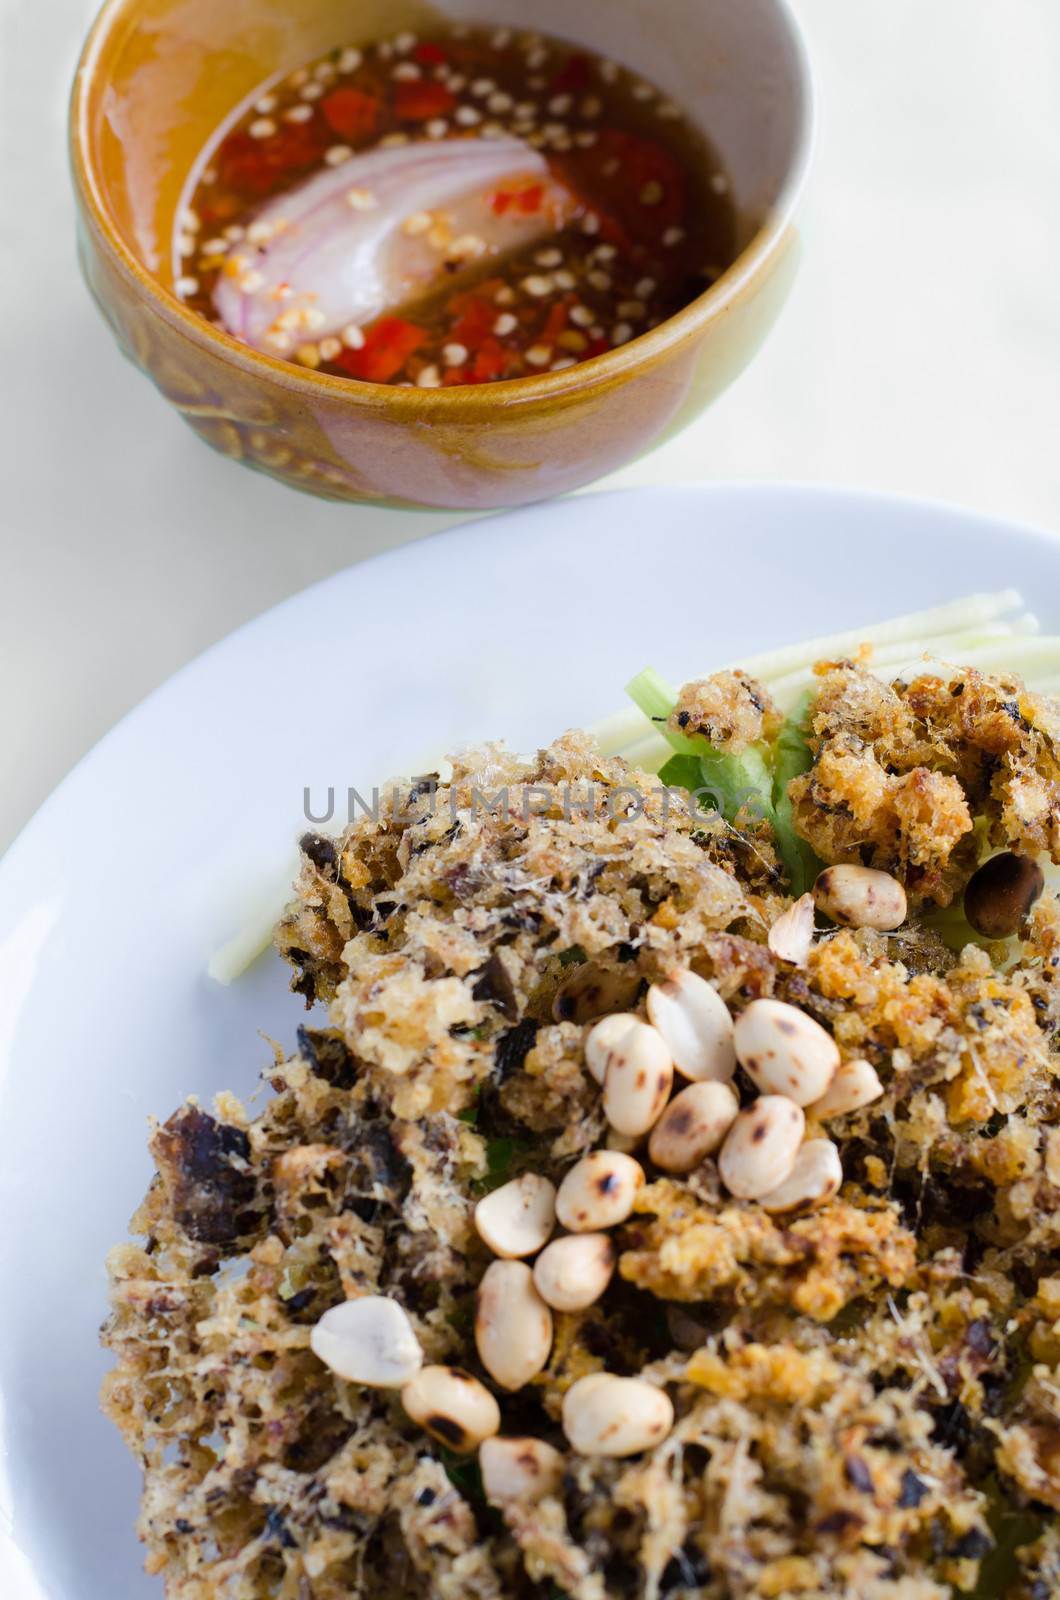 minced catfish salad with spicy sauce by siraanamwong